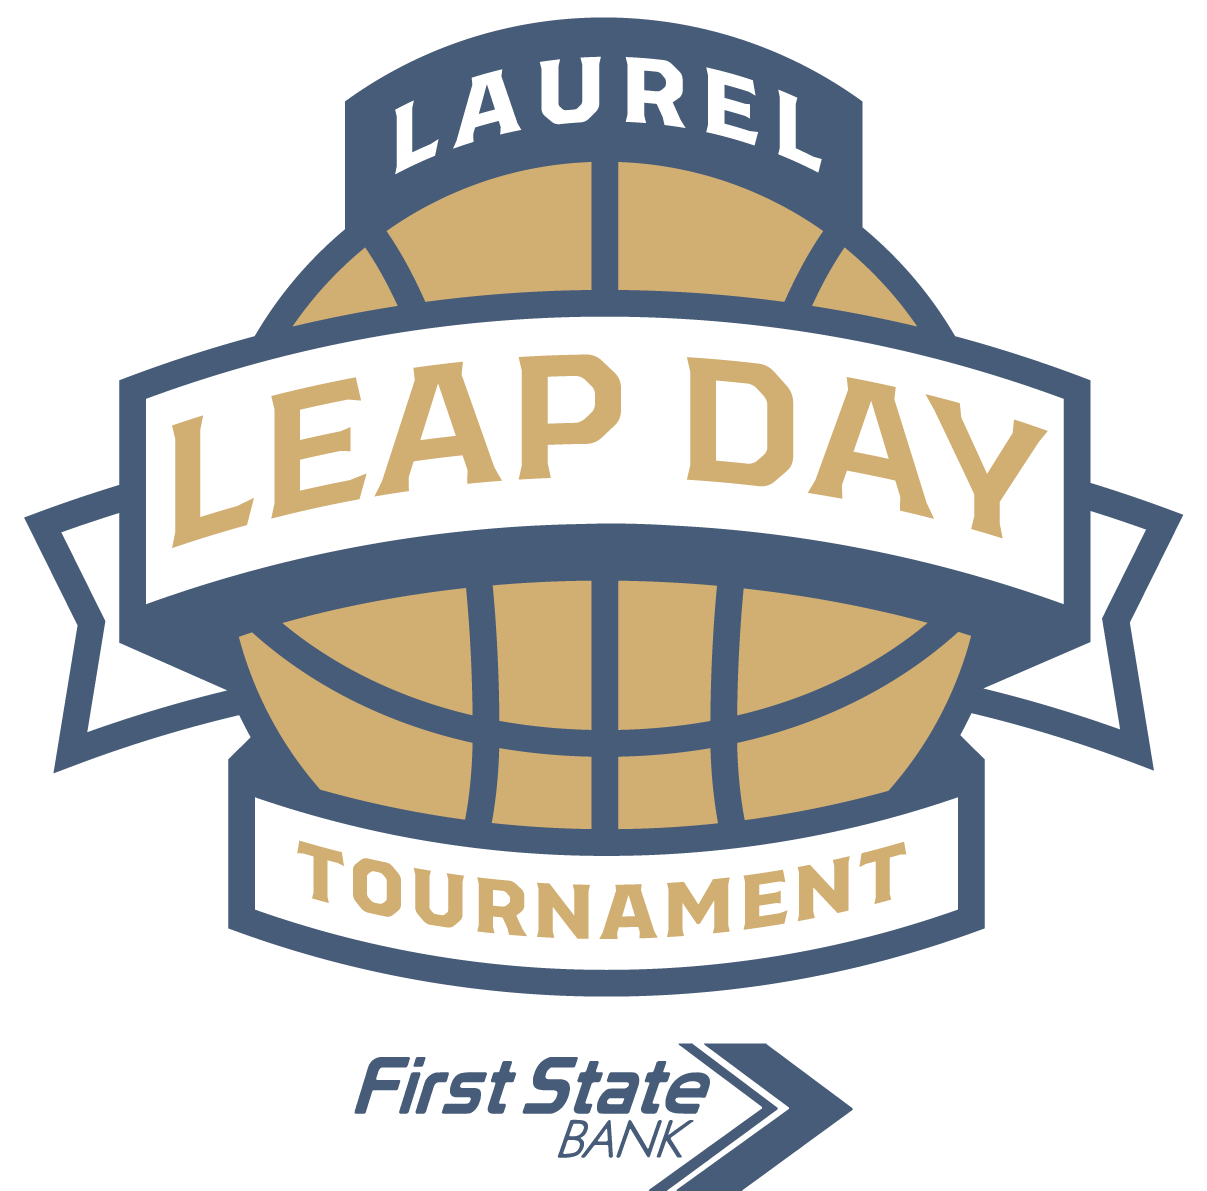 First State Bank Laurel Leap Team Entry